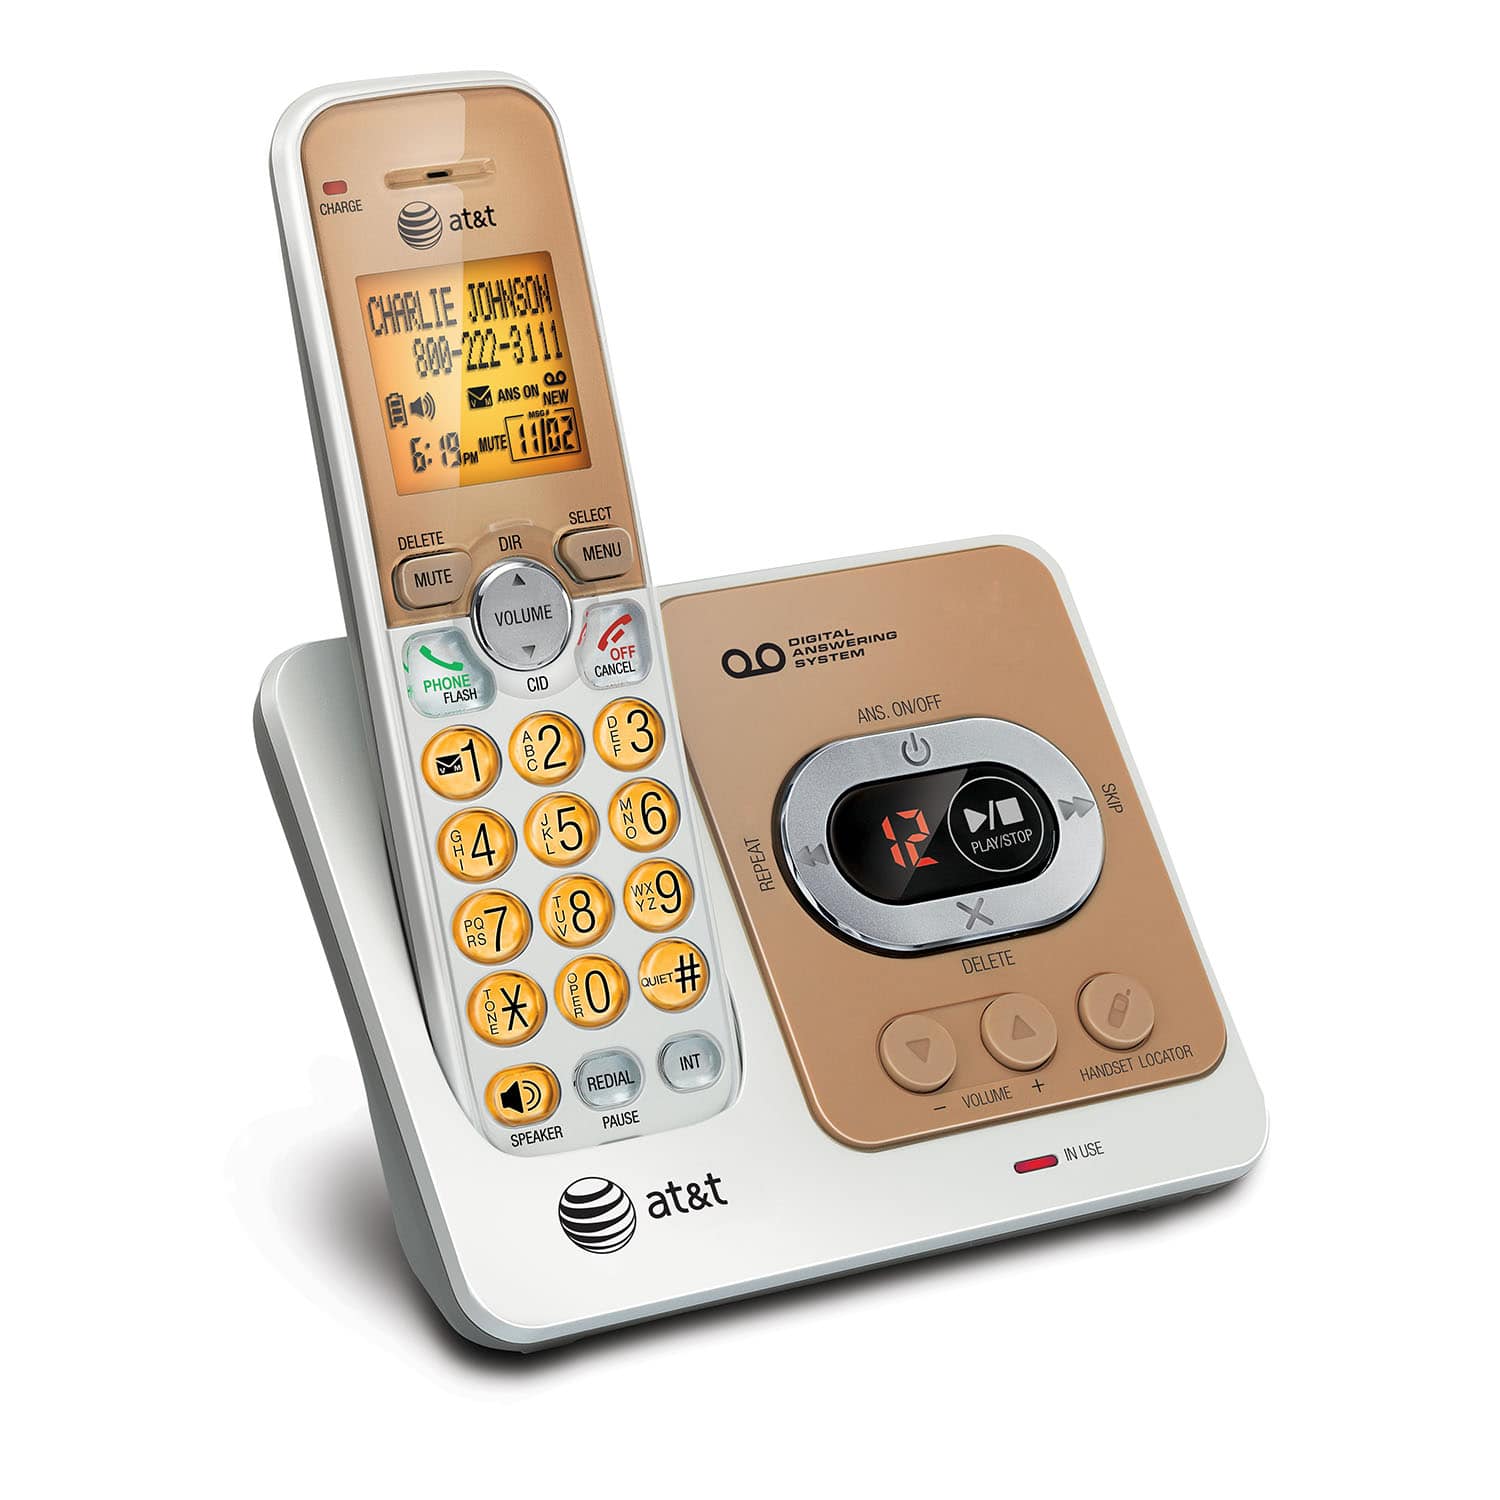 Cordless phone system with caller ID/call waiting - view 2